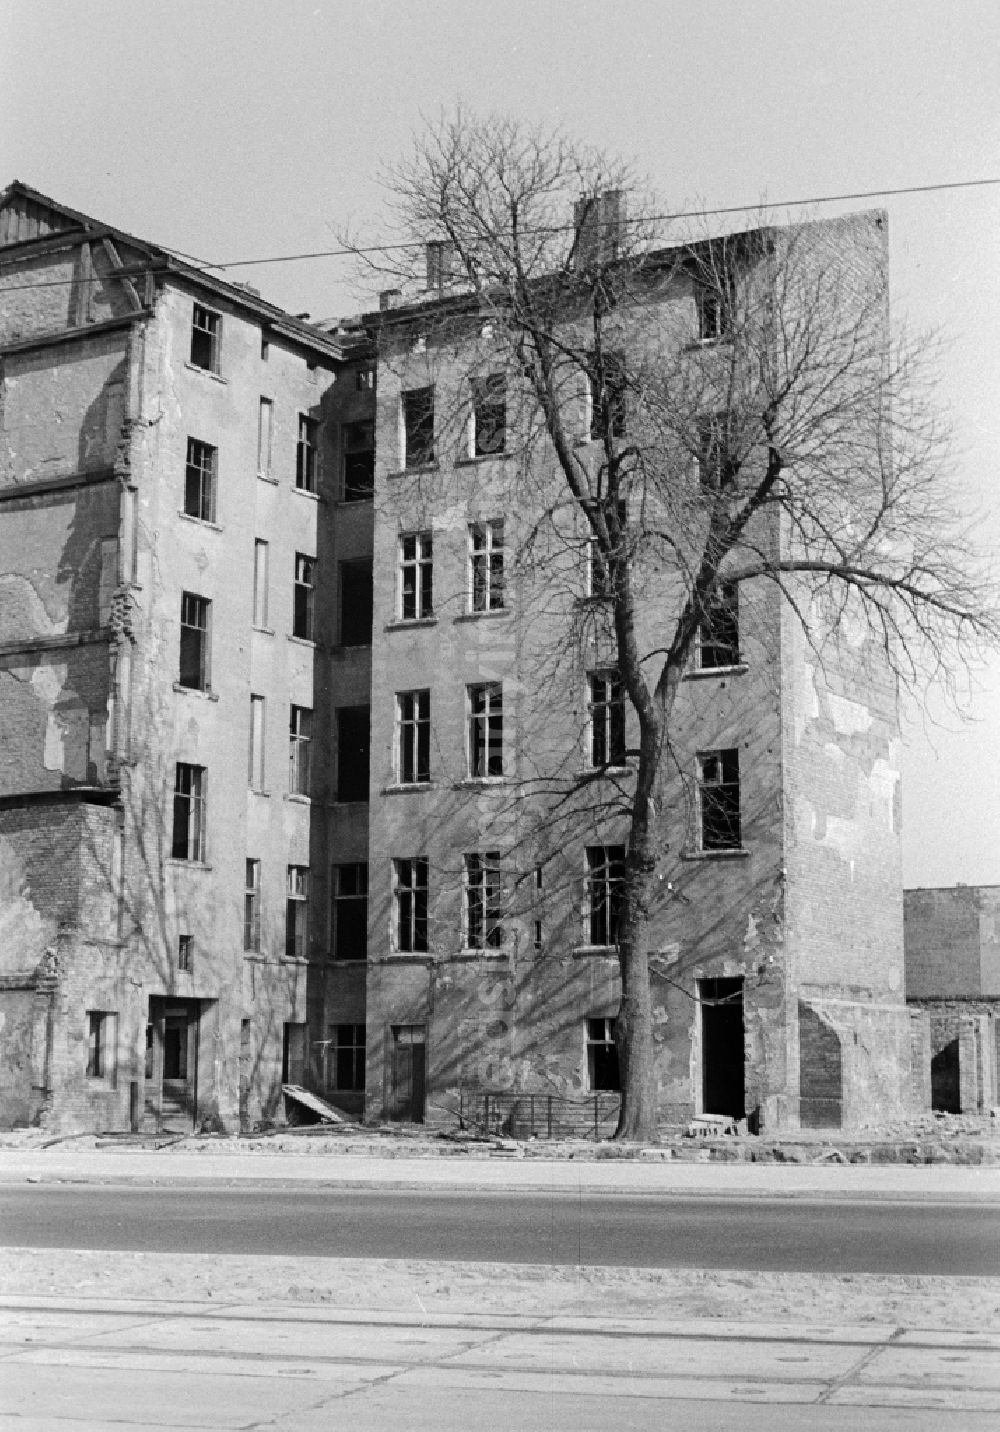 GDR photo archive: Berlin - Empty old building in Berlin, the former capital of the GDR, German Democratic Republic